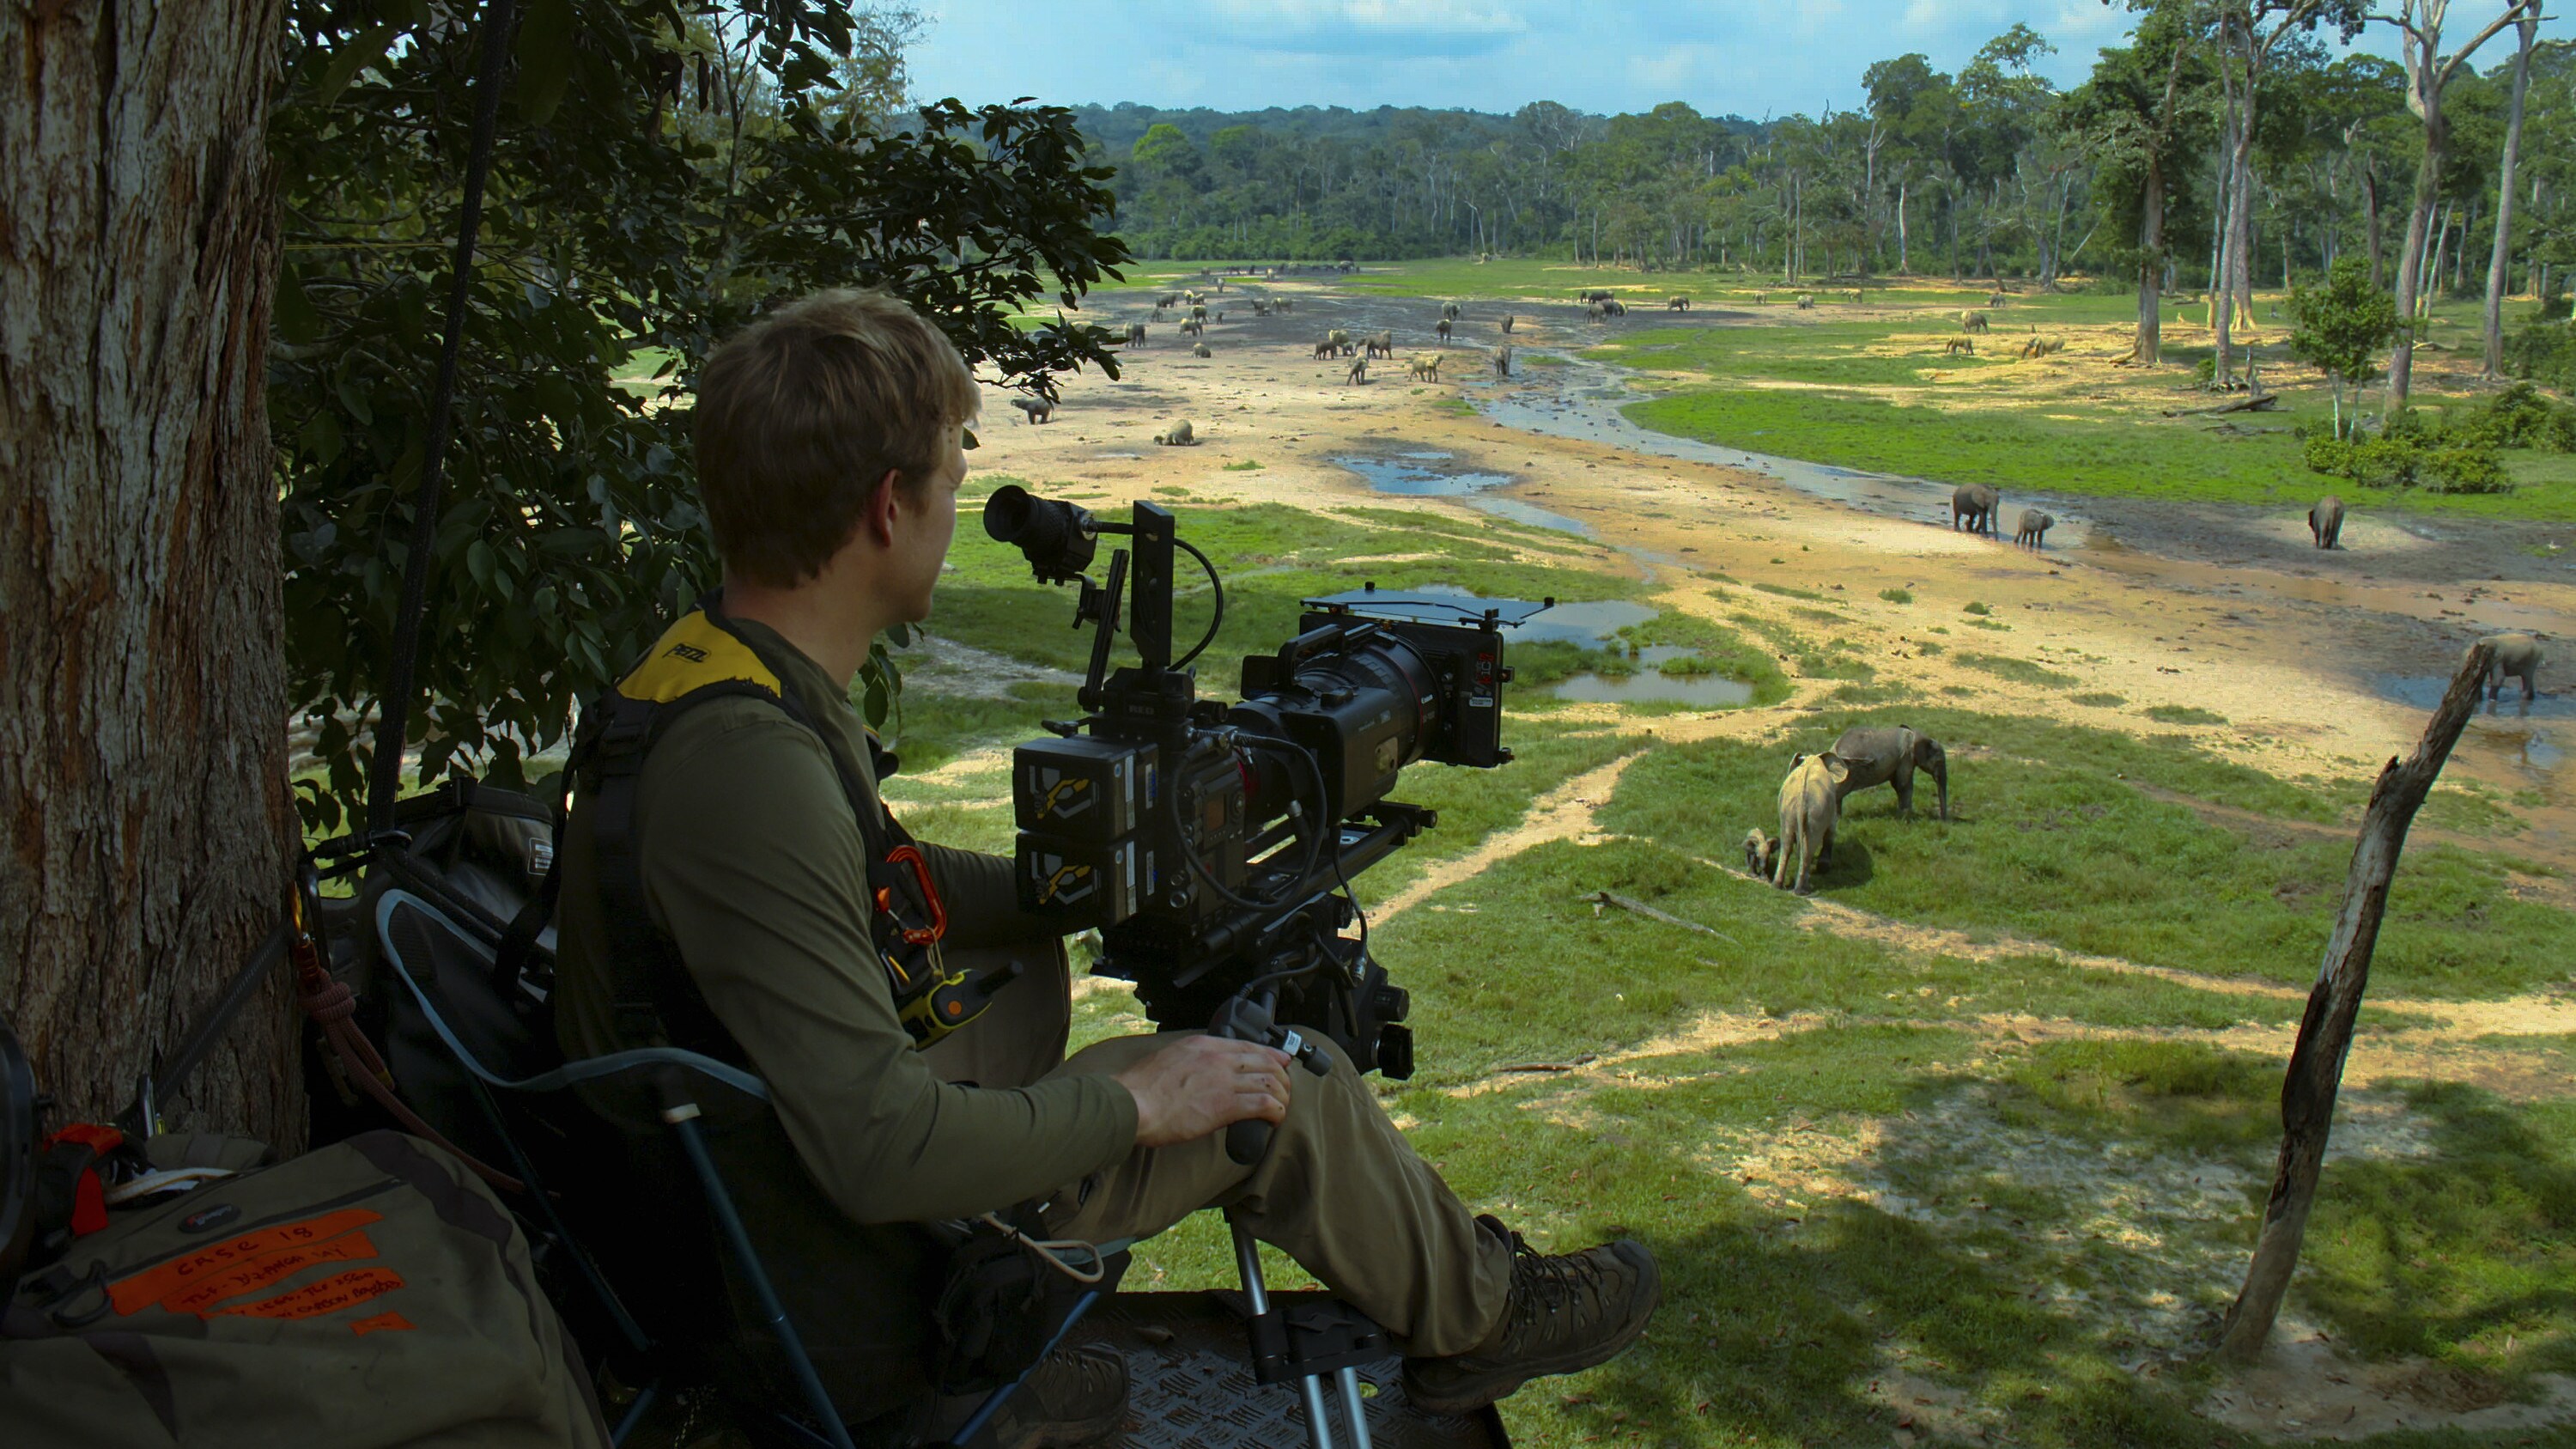 Bertie Gregory on the tree platform filming the elephants below on the Bai. (National Geographic for Disney+/Mark Mclean)